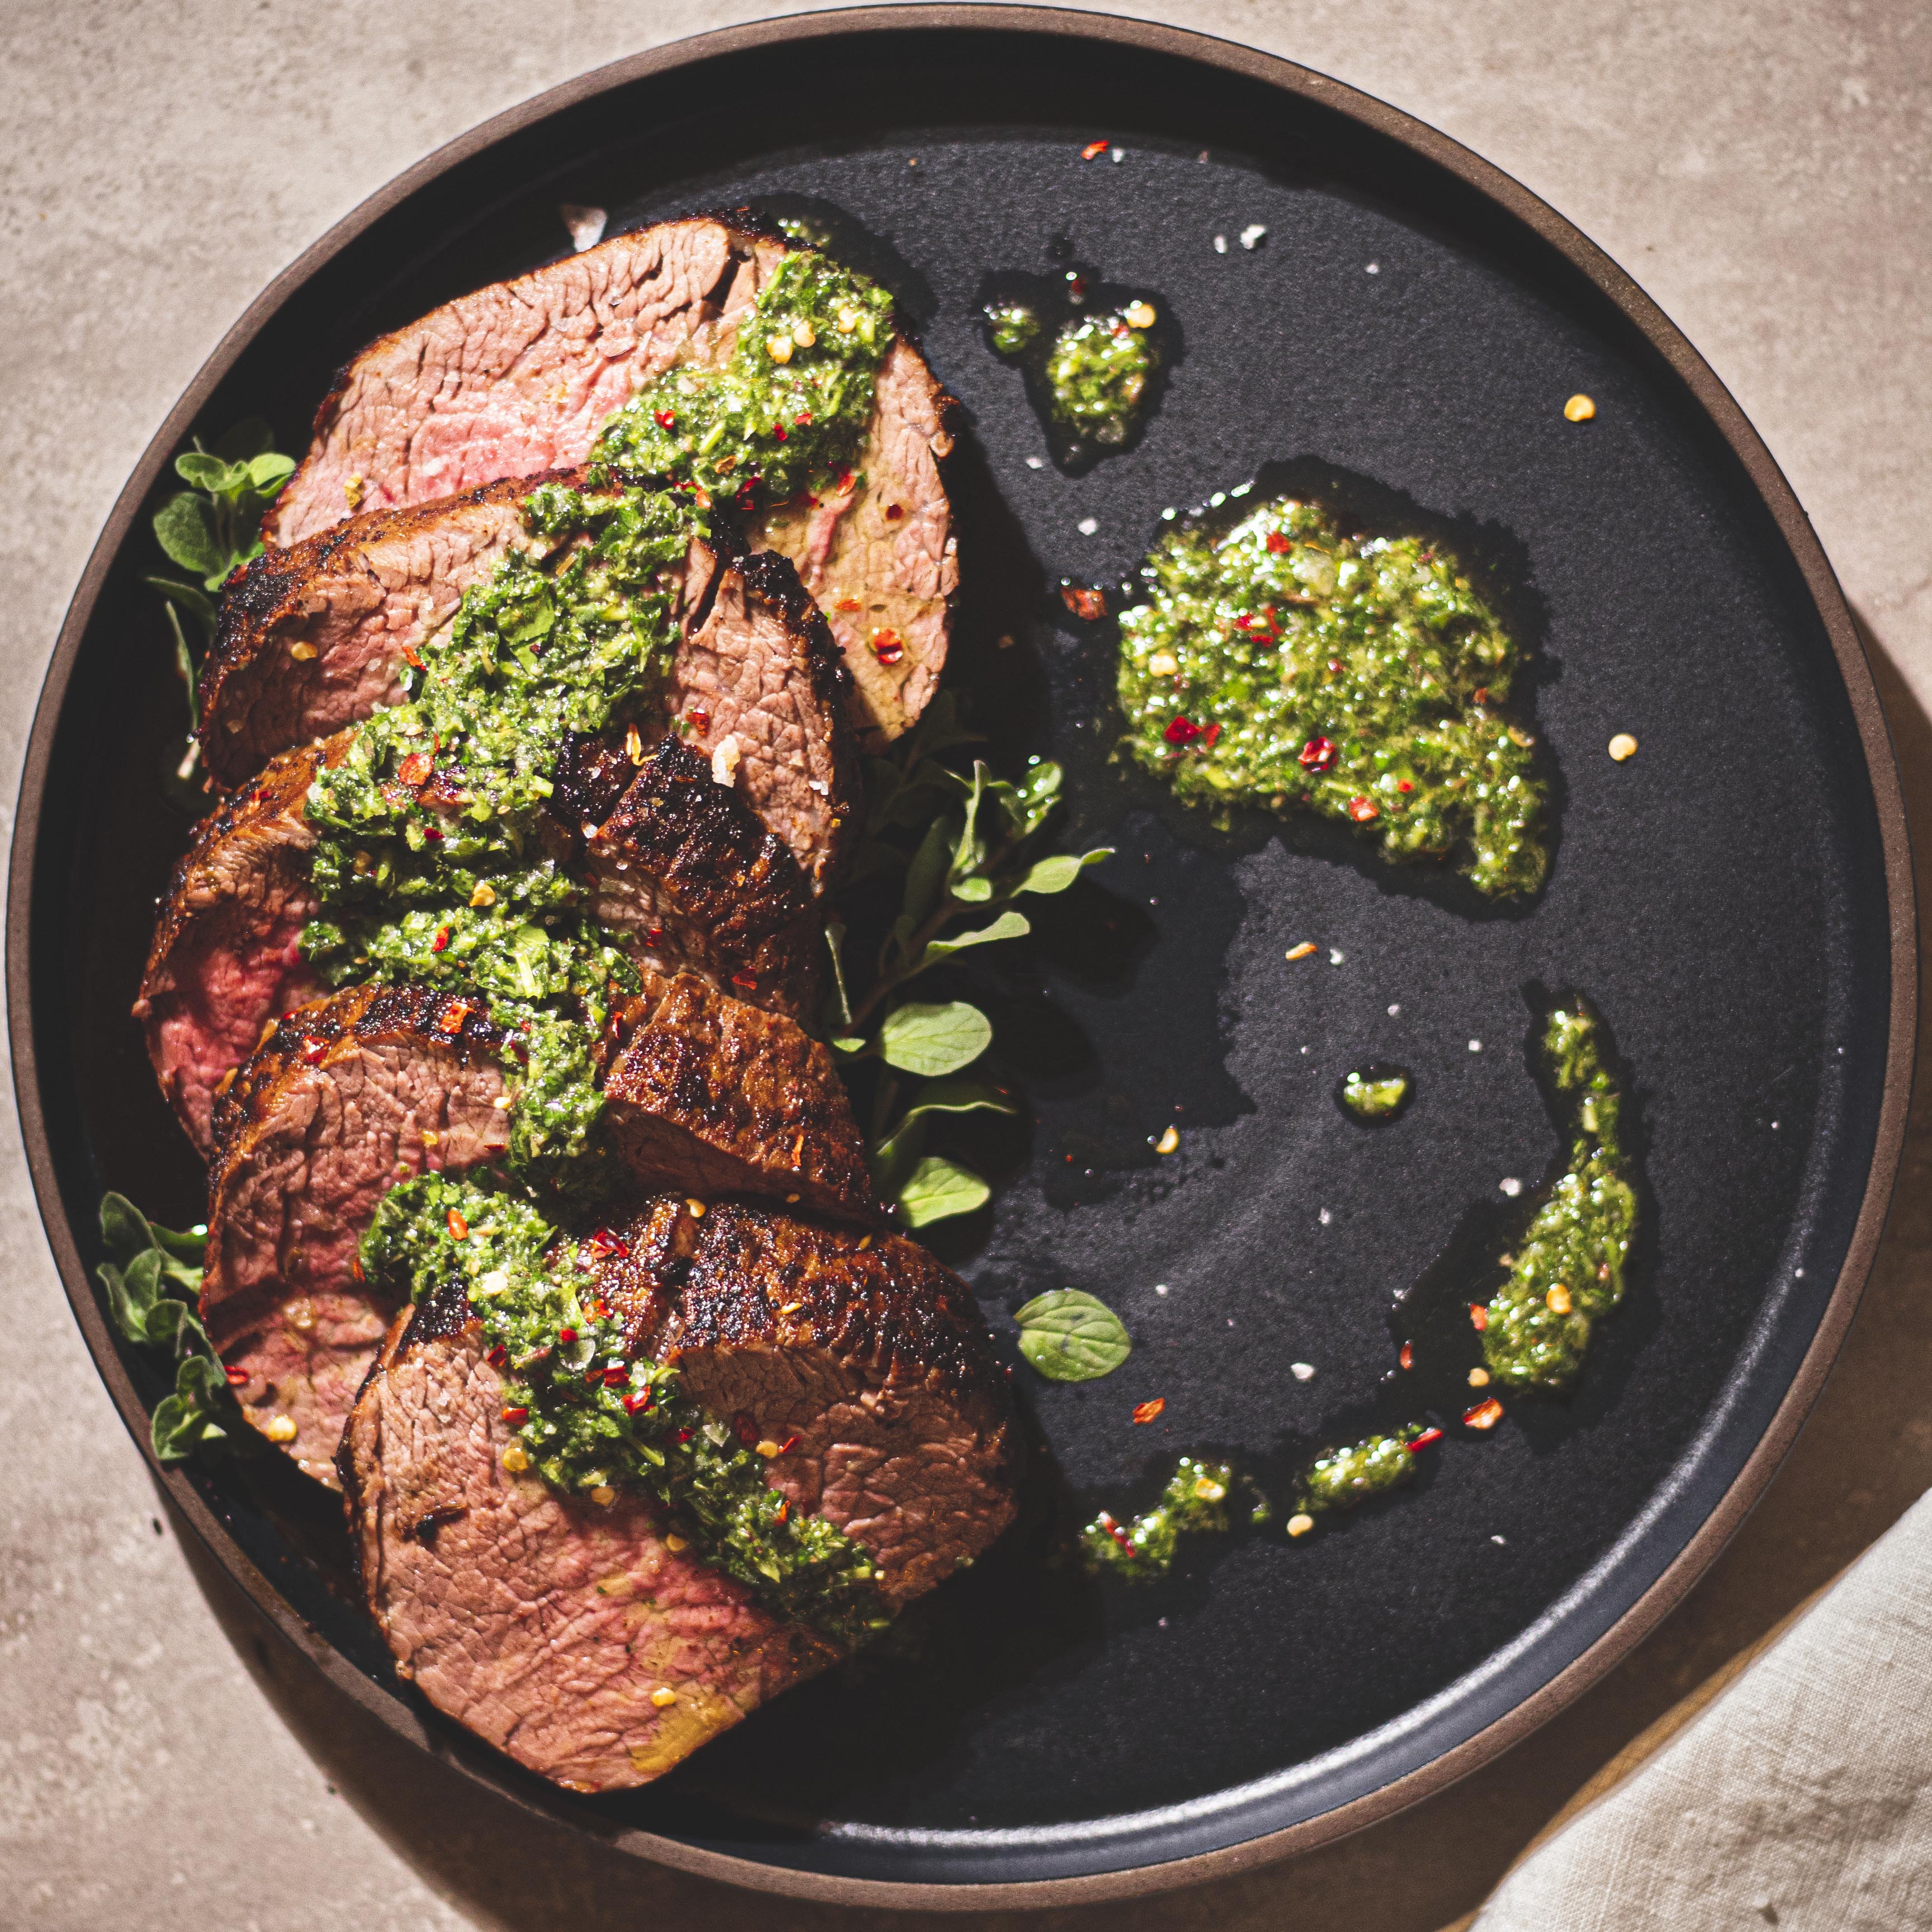 Beef tenderloin in a skillet with chimichurri sauce